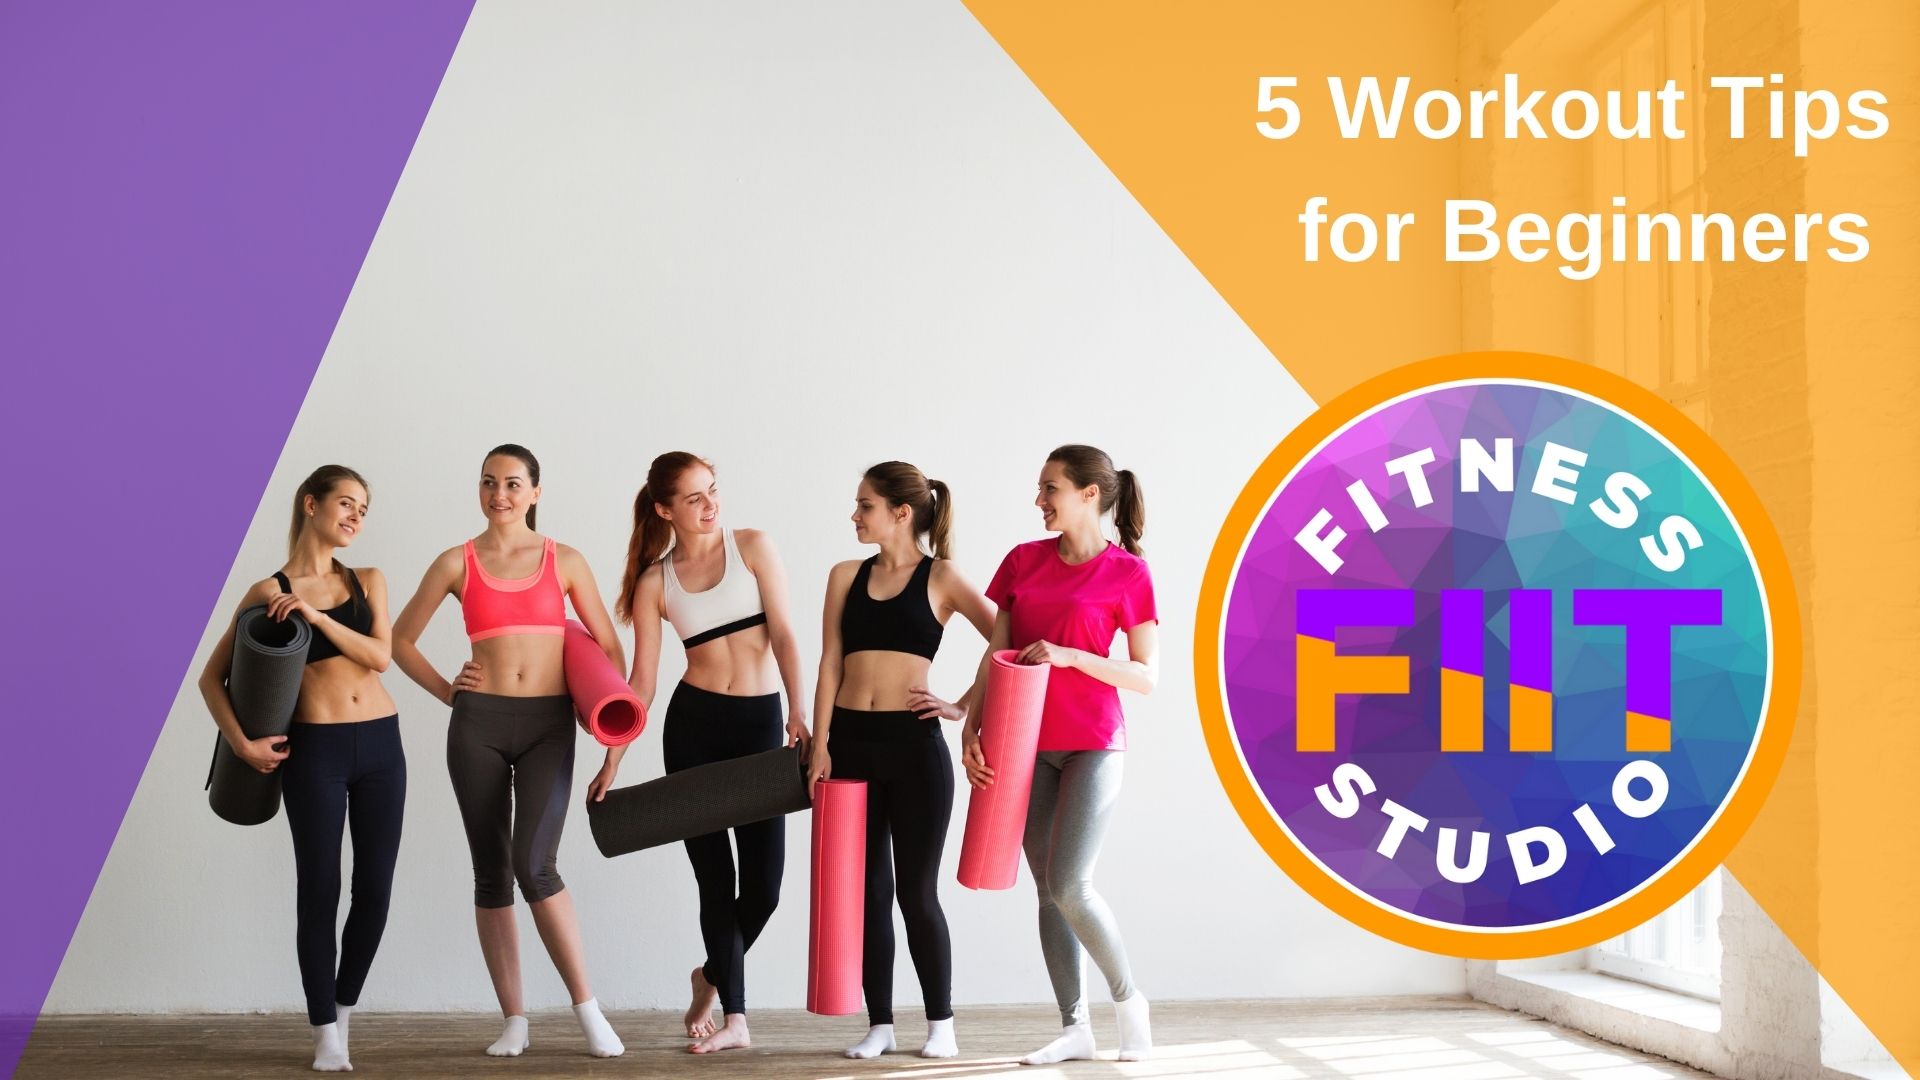 5 Workout Tips for Beginners